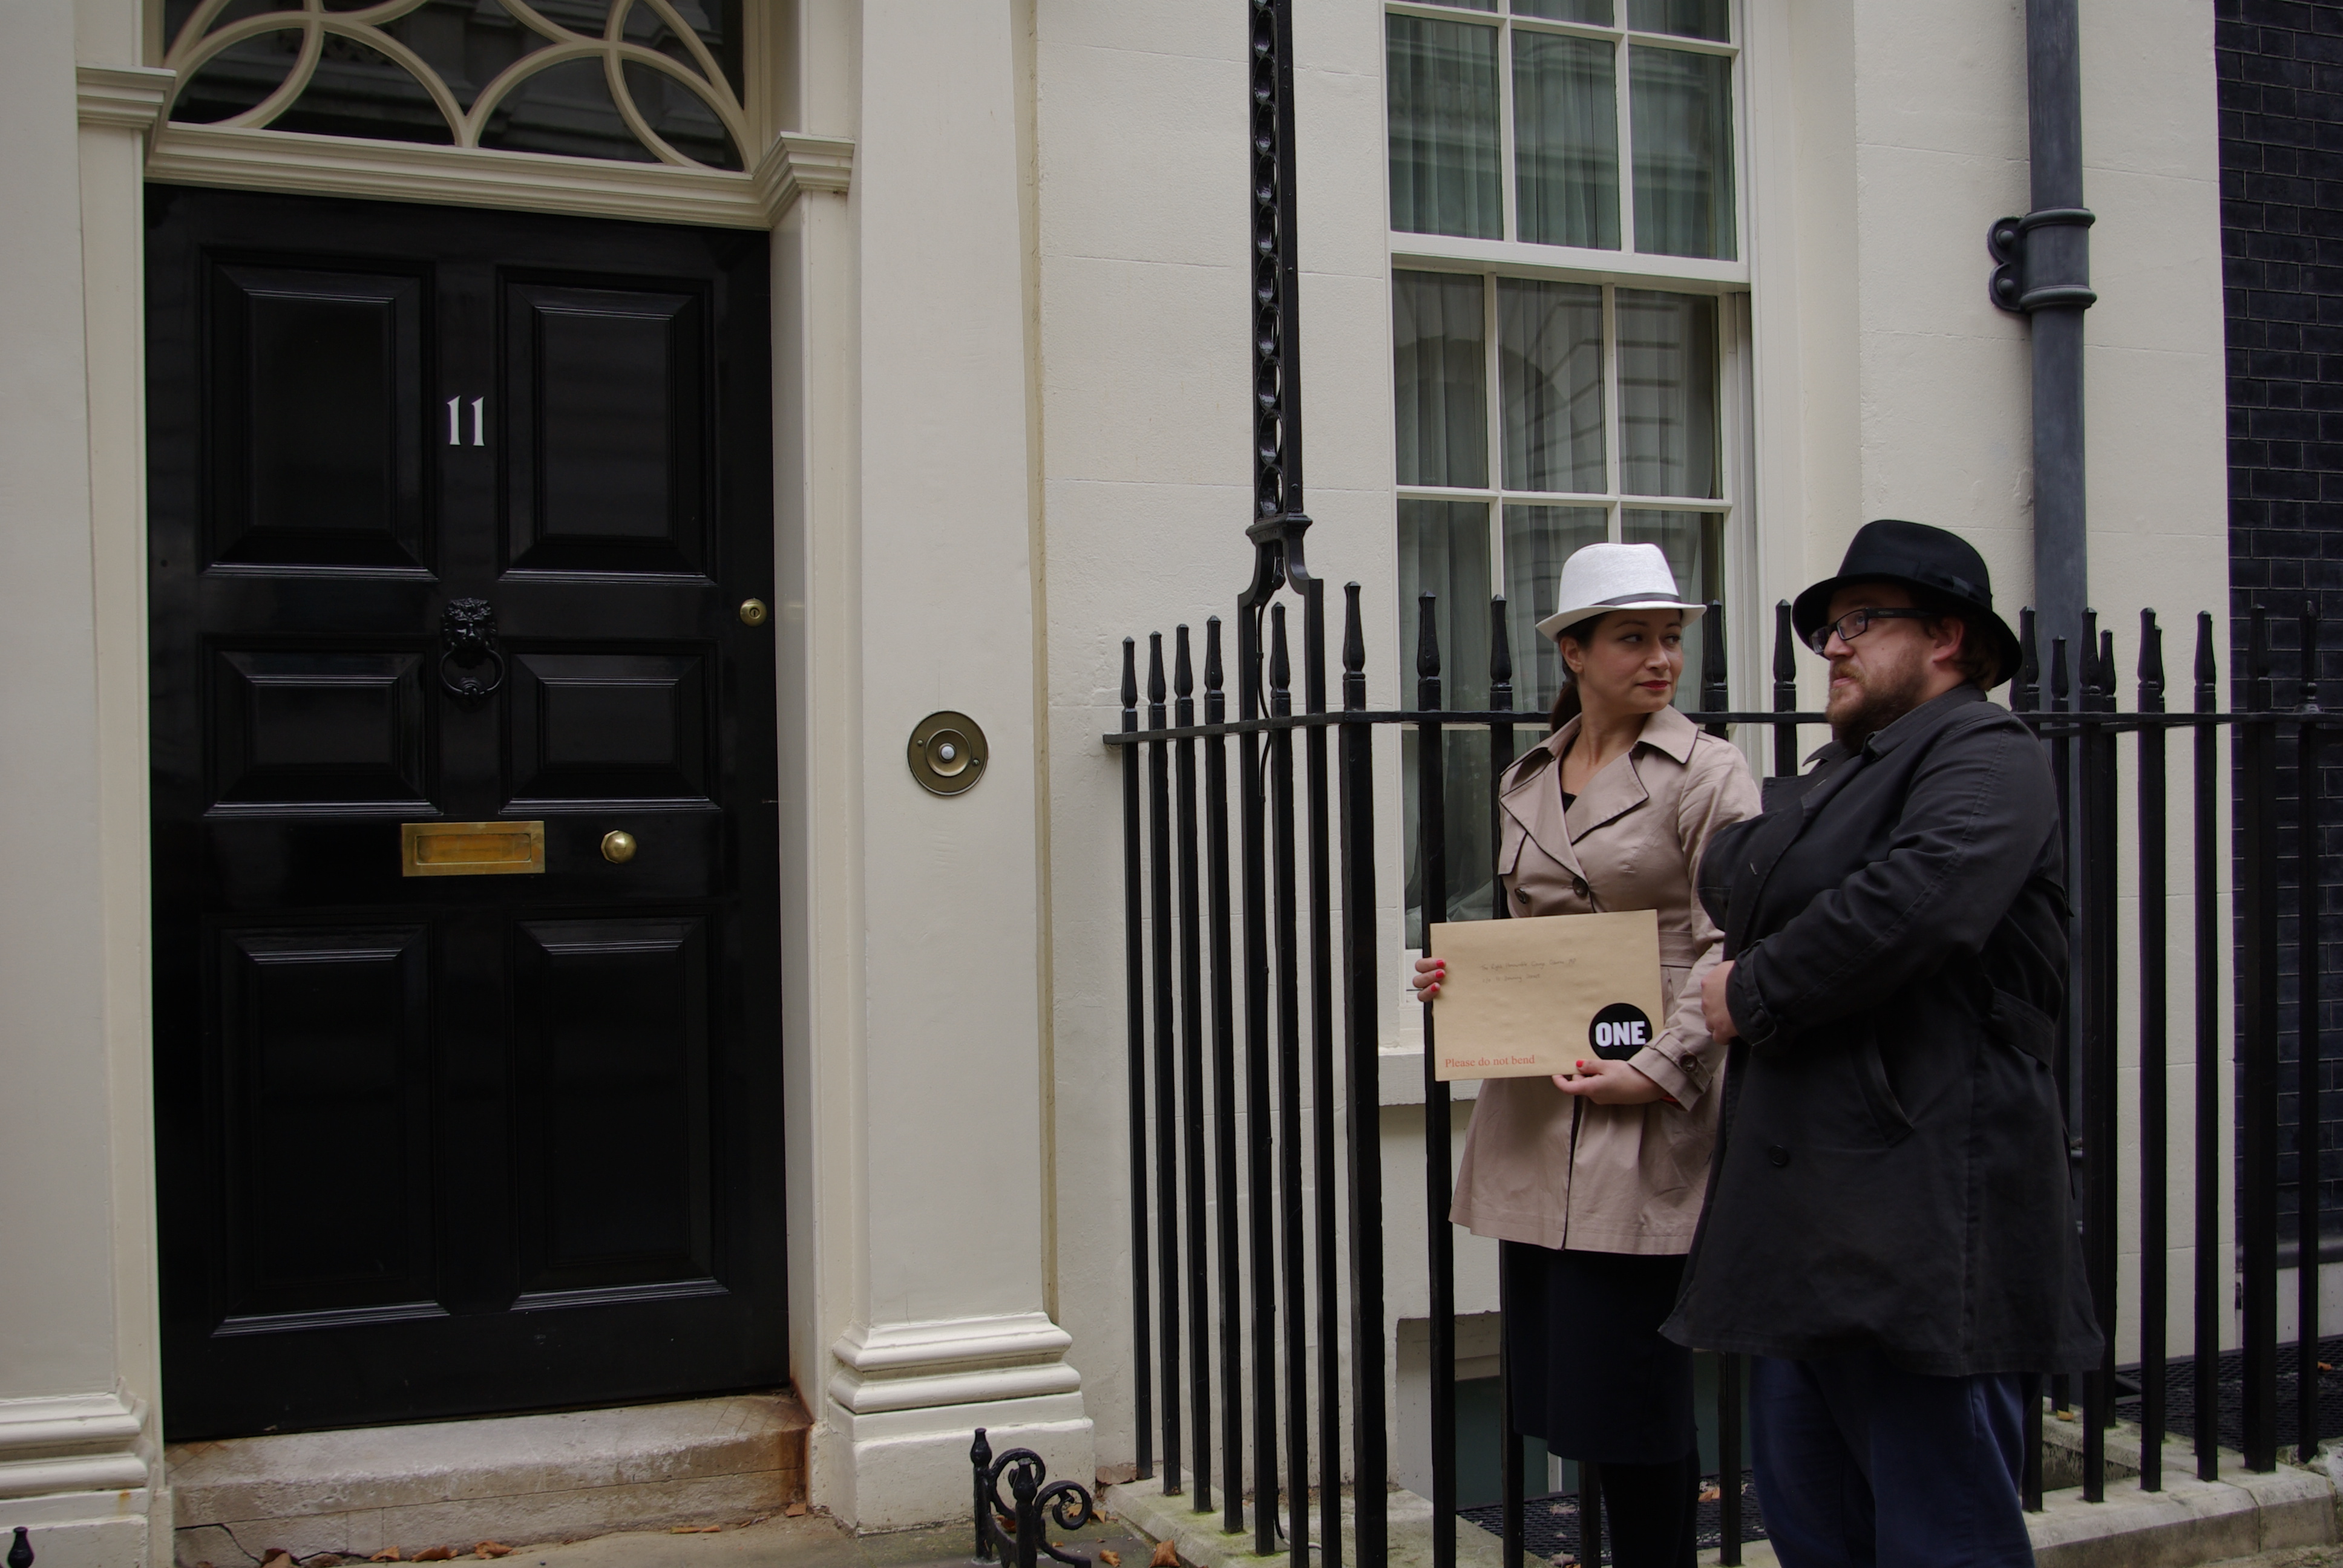 Caught on camera – shady couple deliver mystery package to George Osborne’s house